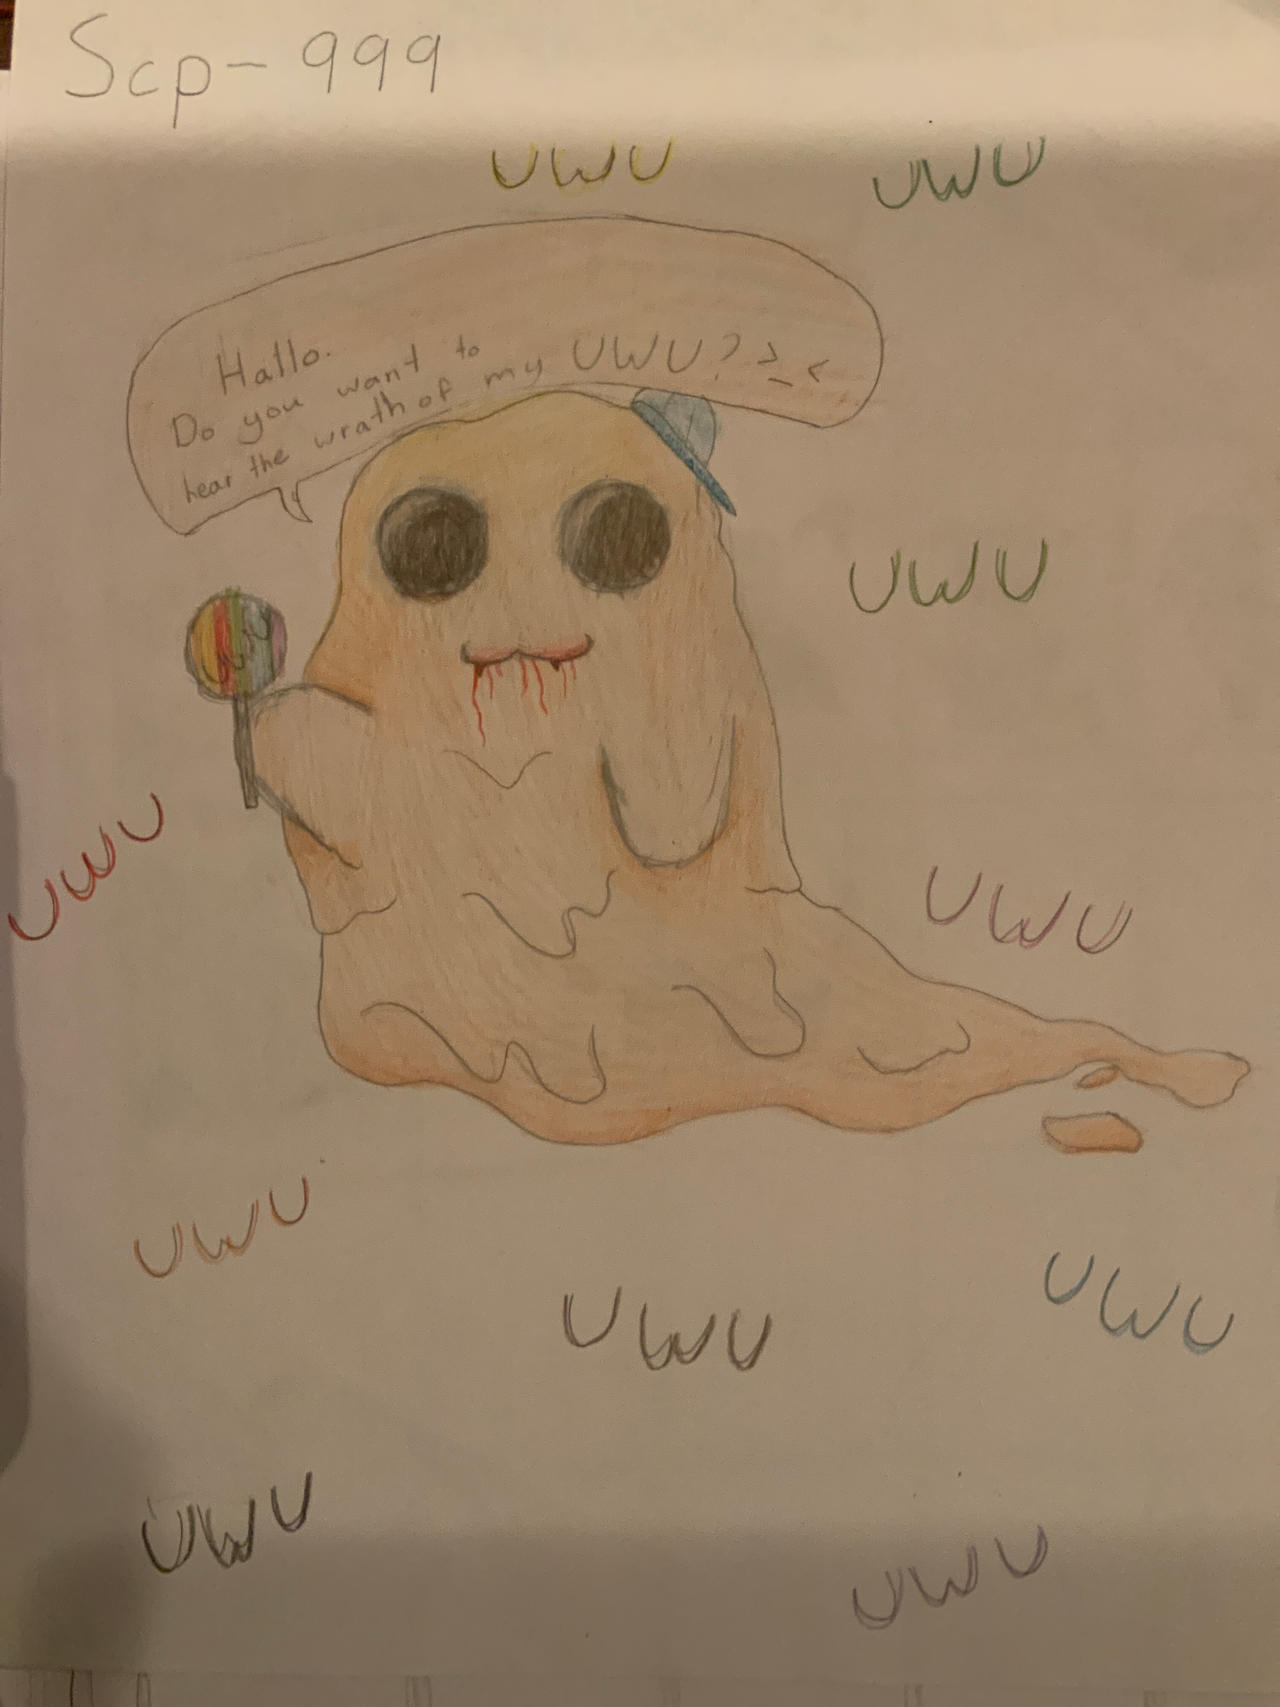 I wanted to draw scp-999 (the tickle monster) and this is how it